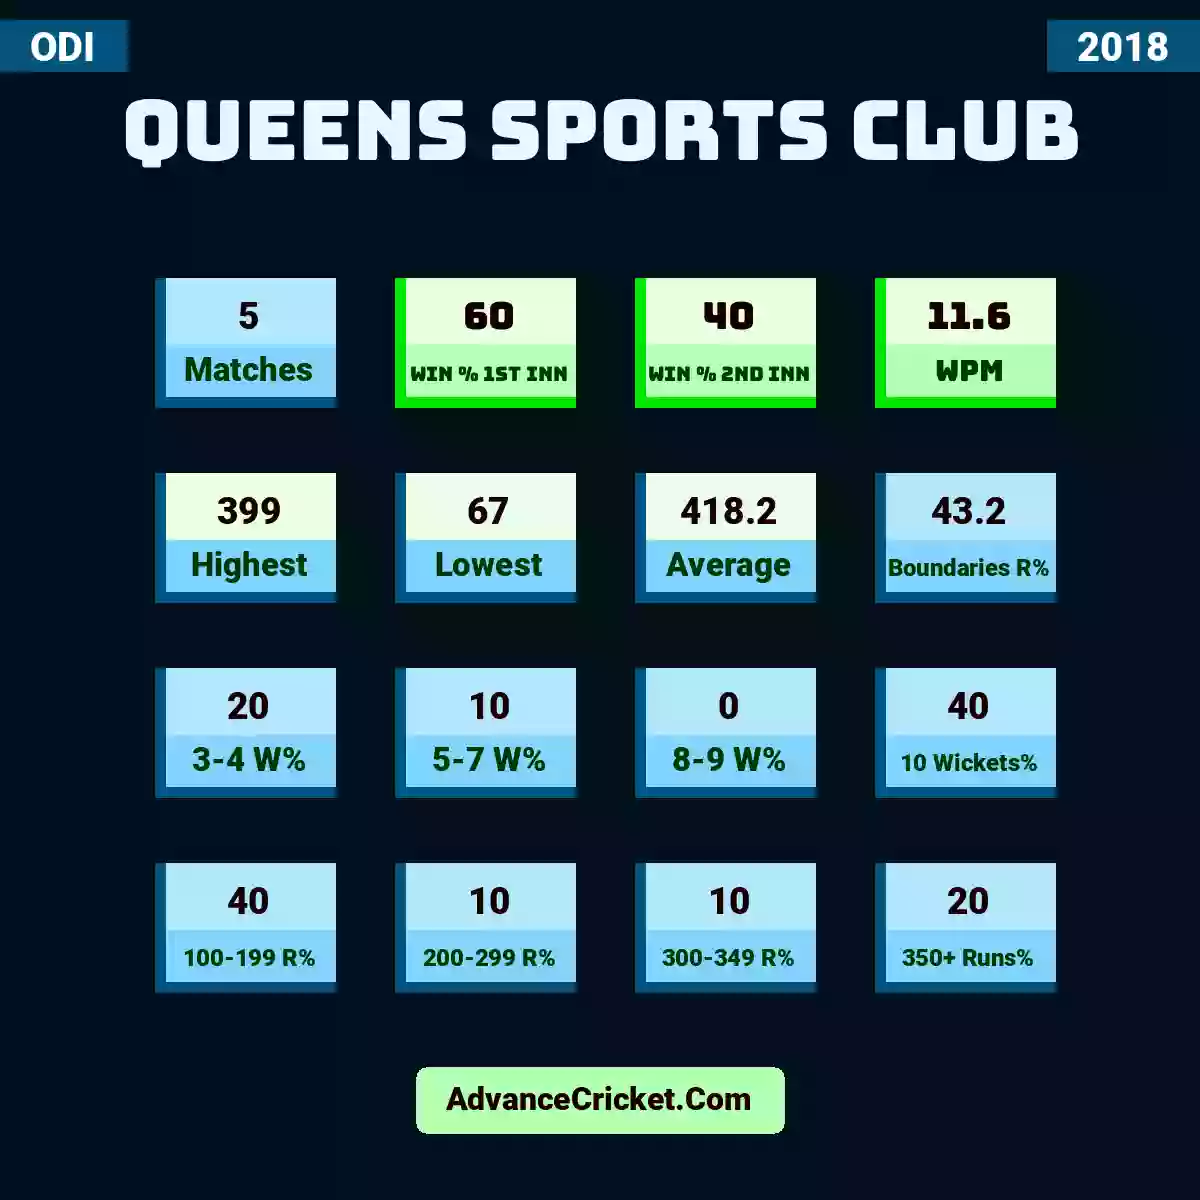 Image showing Queens Sports Club with Matches: 5, Win % 1st Inn: 60, Win % 2nd Inn: 40, WPM: 11.6, Highest: 399, Lowest: 67, Average: 418.2, Boundaries R%: 43.2, 3-4 W%: 20, 5-7 W%: 10, 8-9 W%: 0, 10 Wickets%: 40, 100-199 R%: 40, 200-299 R%: 10, 300-349 R%: 10, 350+ Runs%: 20.